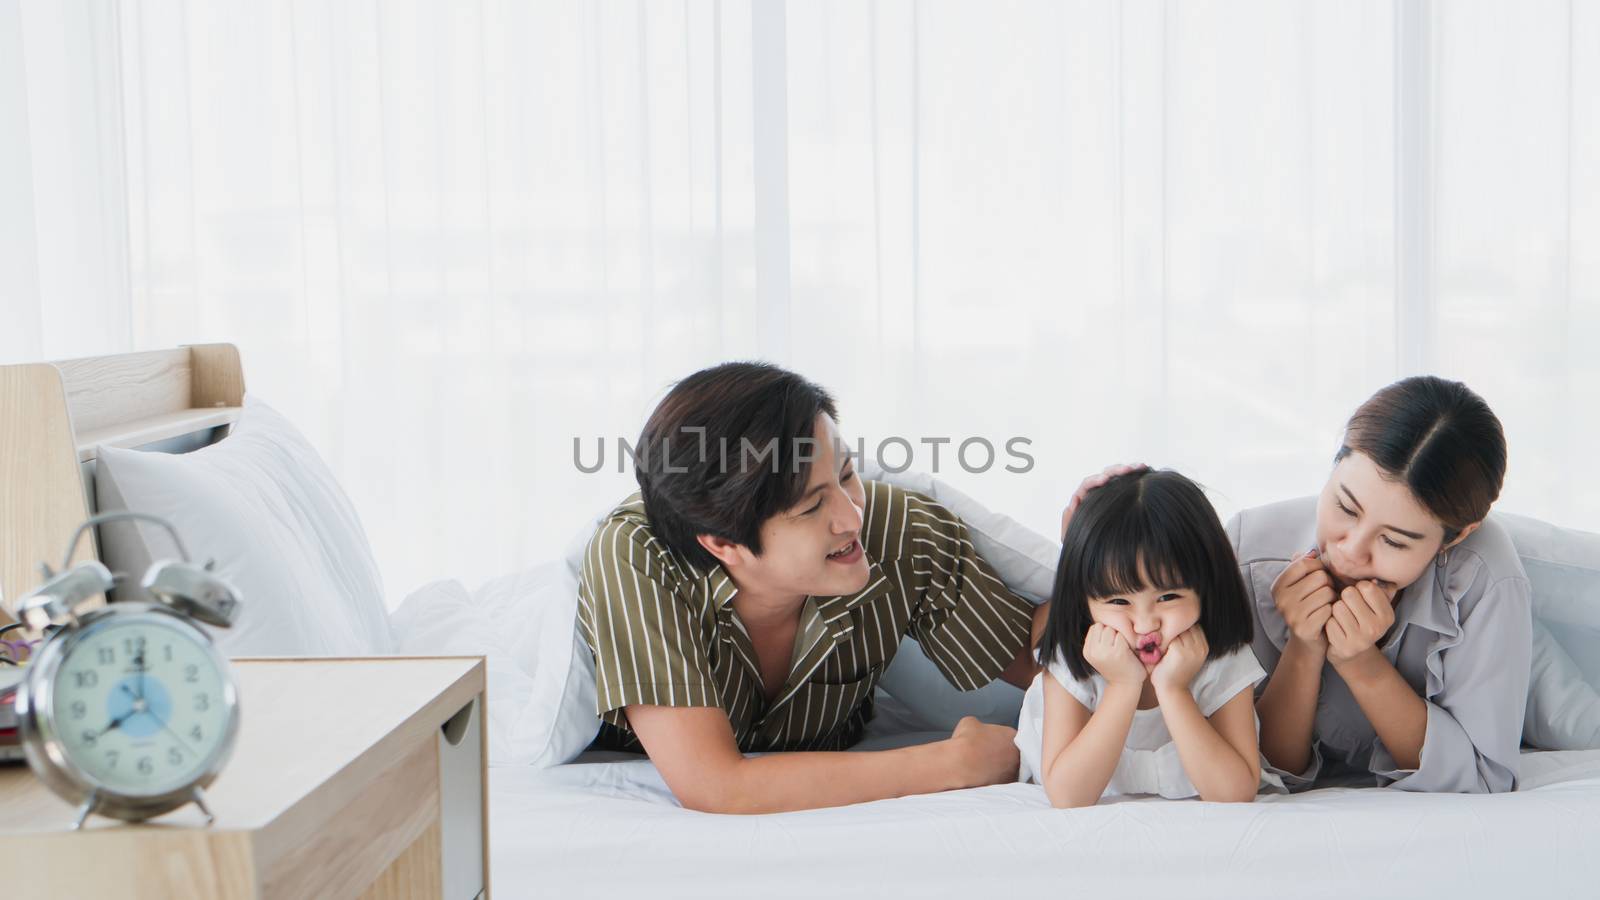 Photos of warm and lovely Asian families. Parents are playing happily and happily with their little daughter in the bedroom. Being happy to be with family on holidays